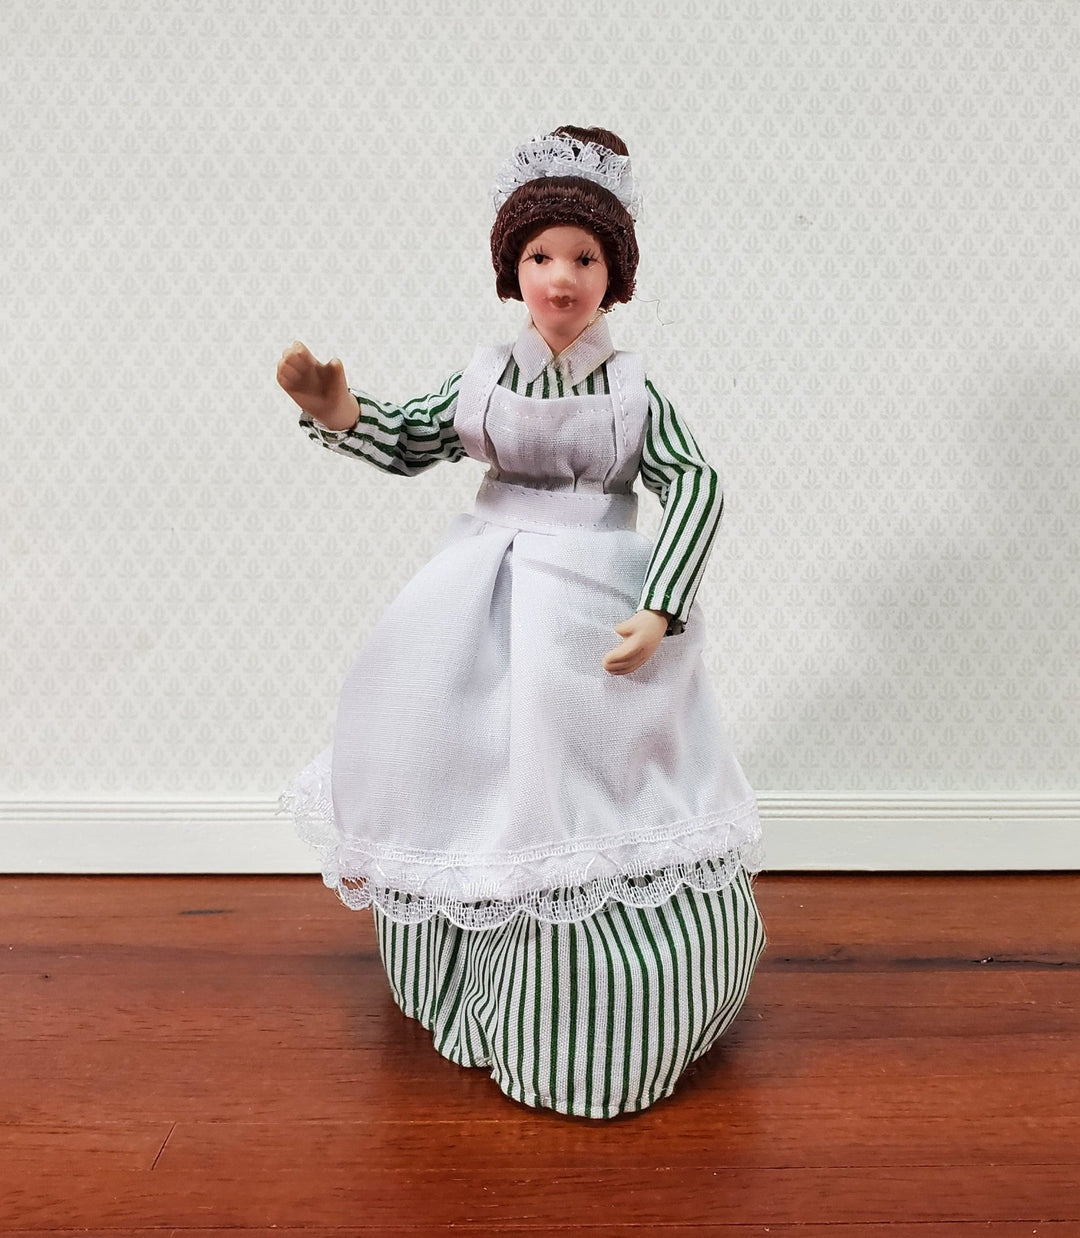 Dollhouse Maid Cook Housekeeper Striped Dress Doll Porcelain Poseable 1:12 Scale - Miniature Crush